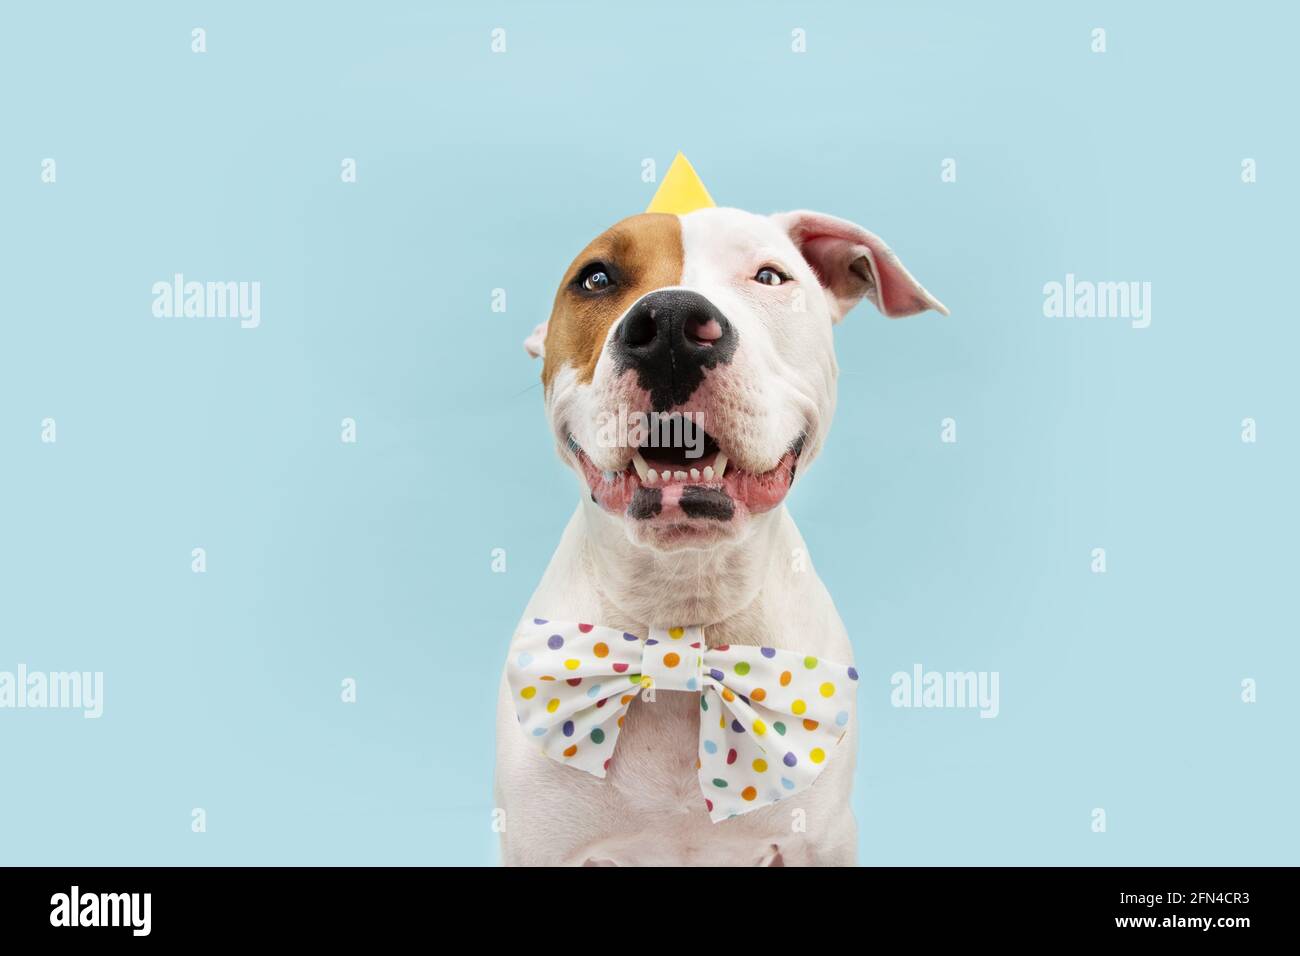 Happy American staffordshire  dog celebrating birthday or carnival wearing party hat and bowtie. Isolated on blue colored background. Stock Photo